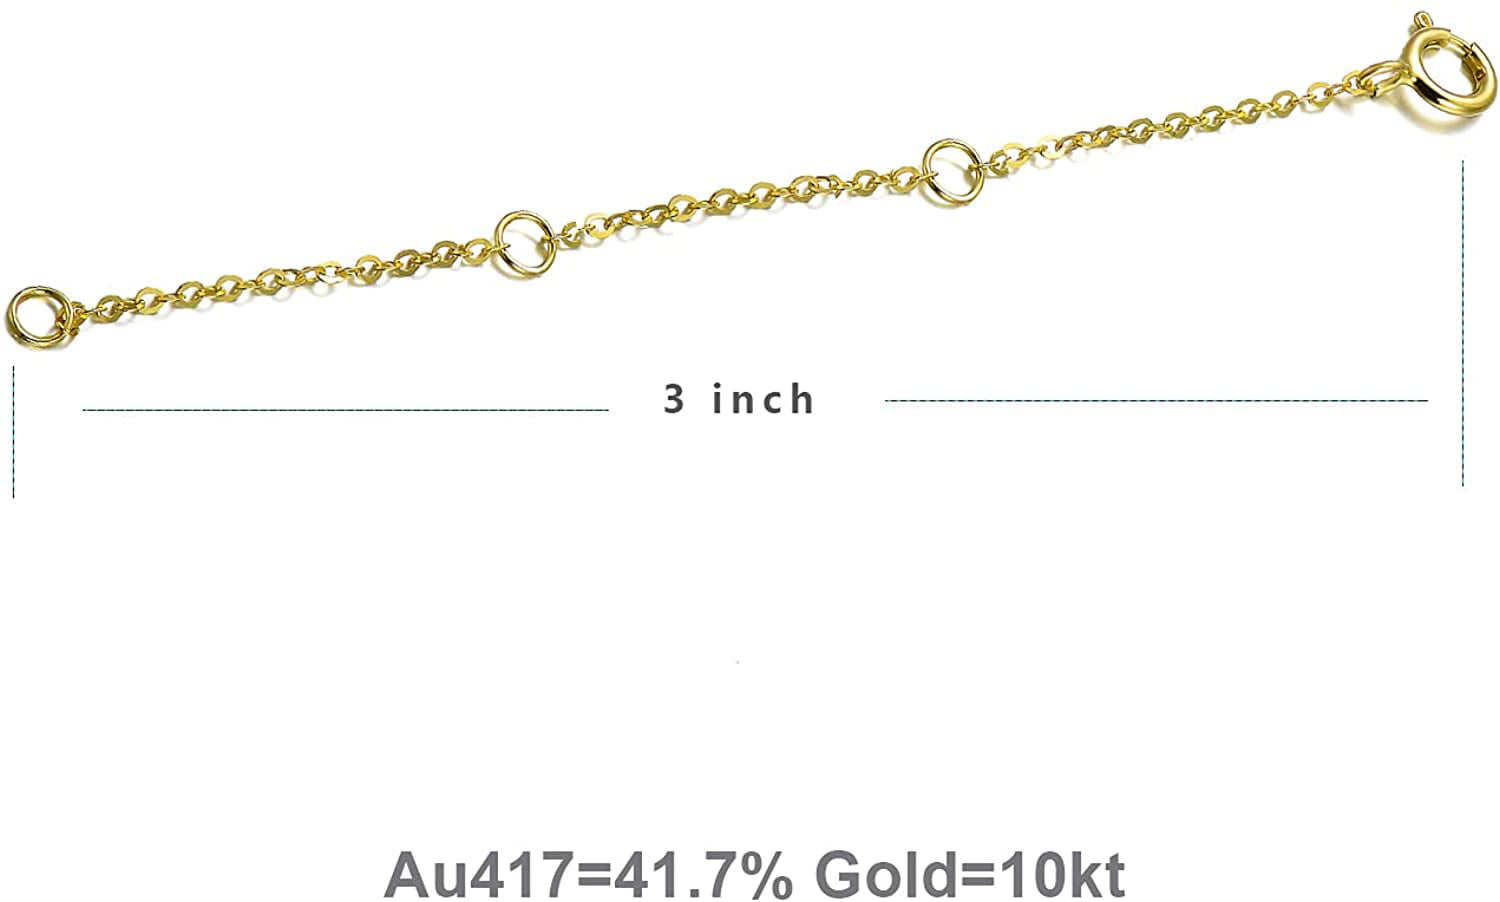 Solid Gold Adjustable Extension Chain for Necklace Bracelet Anklet Durable Strong Removable Chain Extender 14K Yellow Gold 1 2 3 Necklace Bracelet Extender Chain